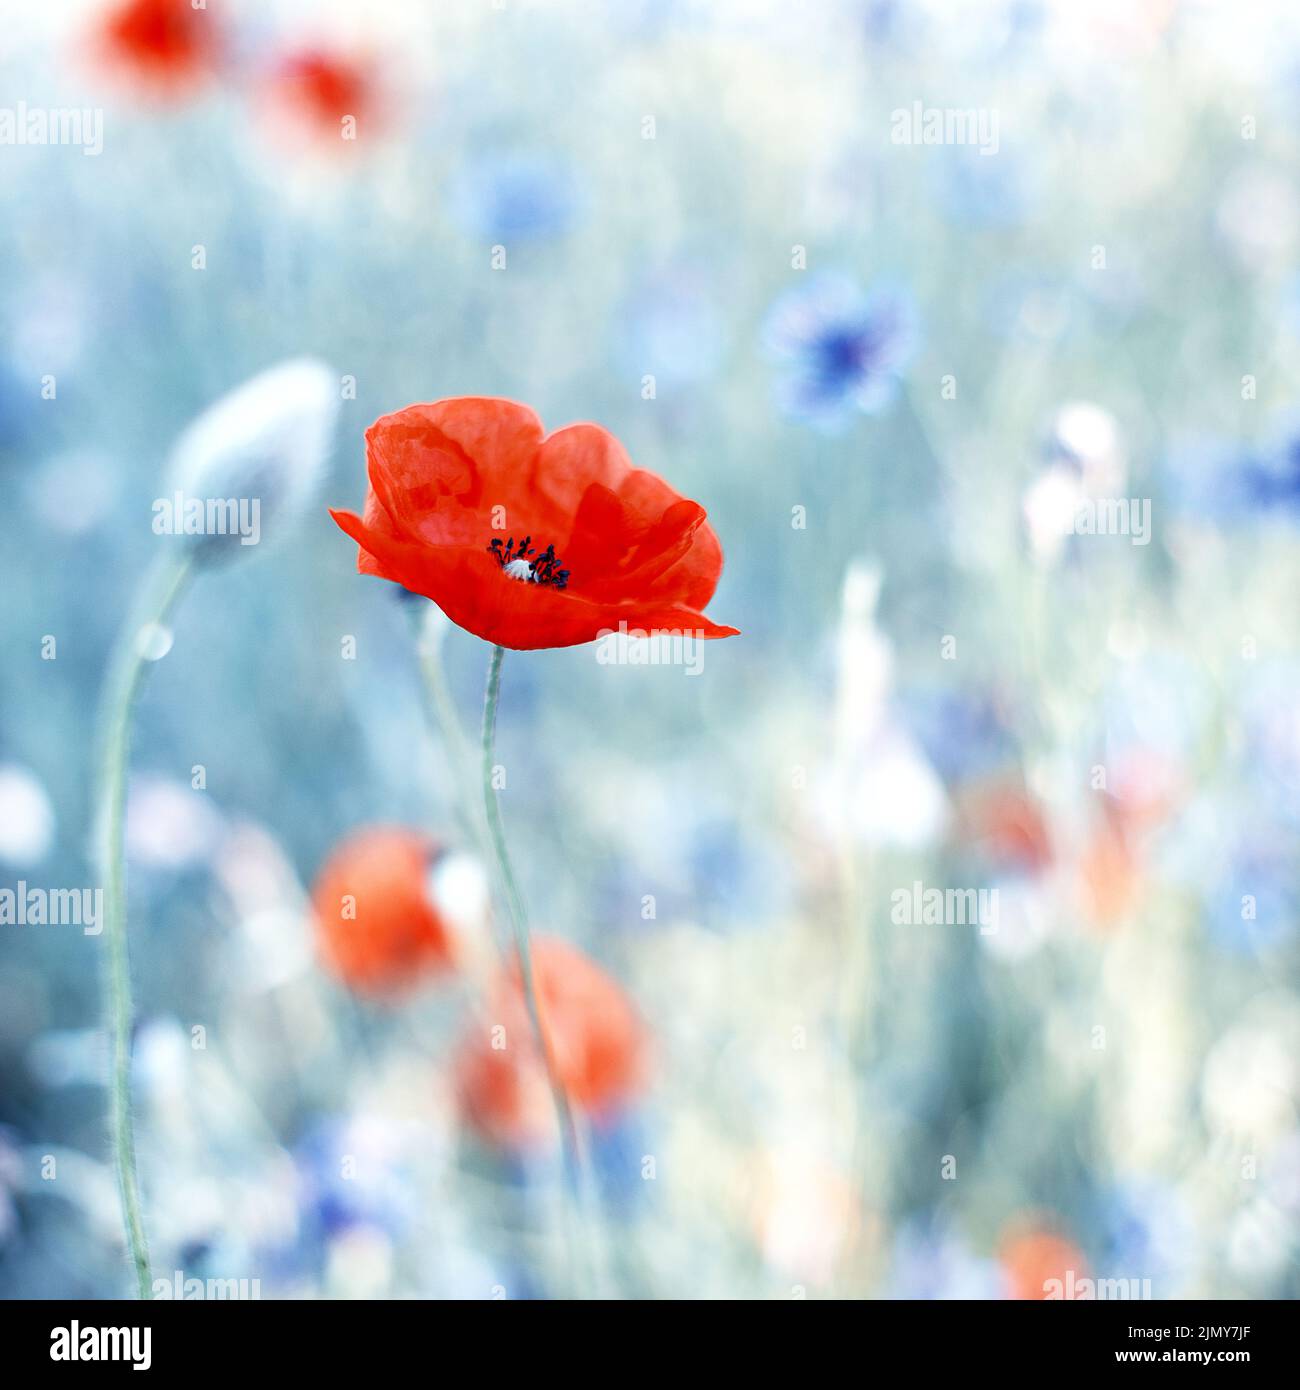 flower meadow with poppies in the foreground and cornflowers out of focus in the background Stock Photo